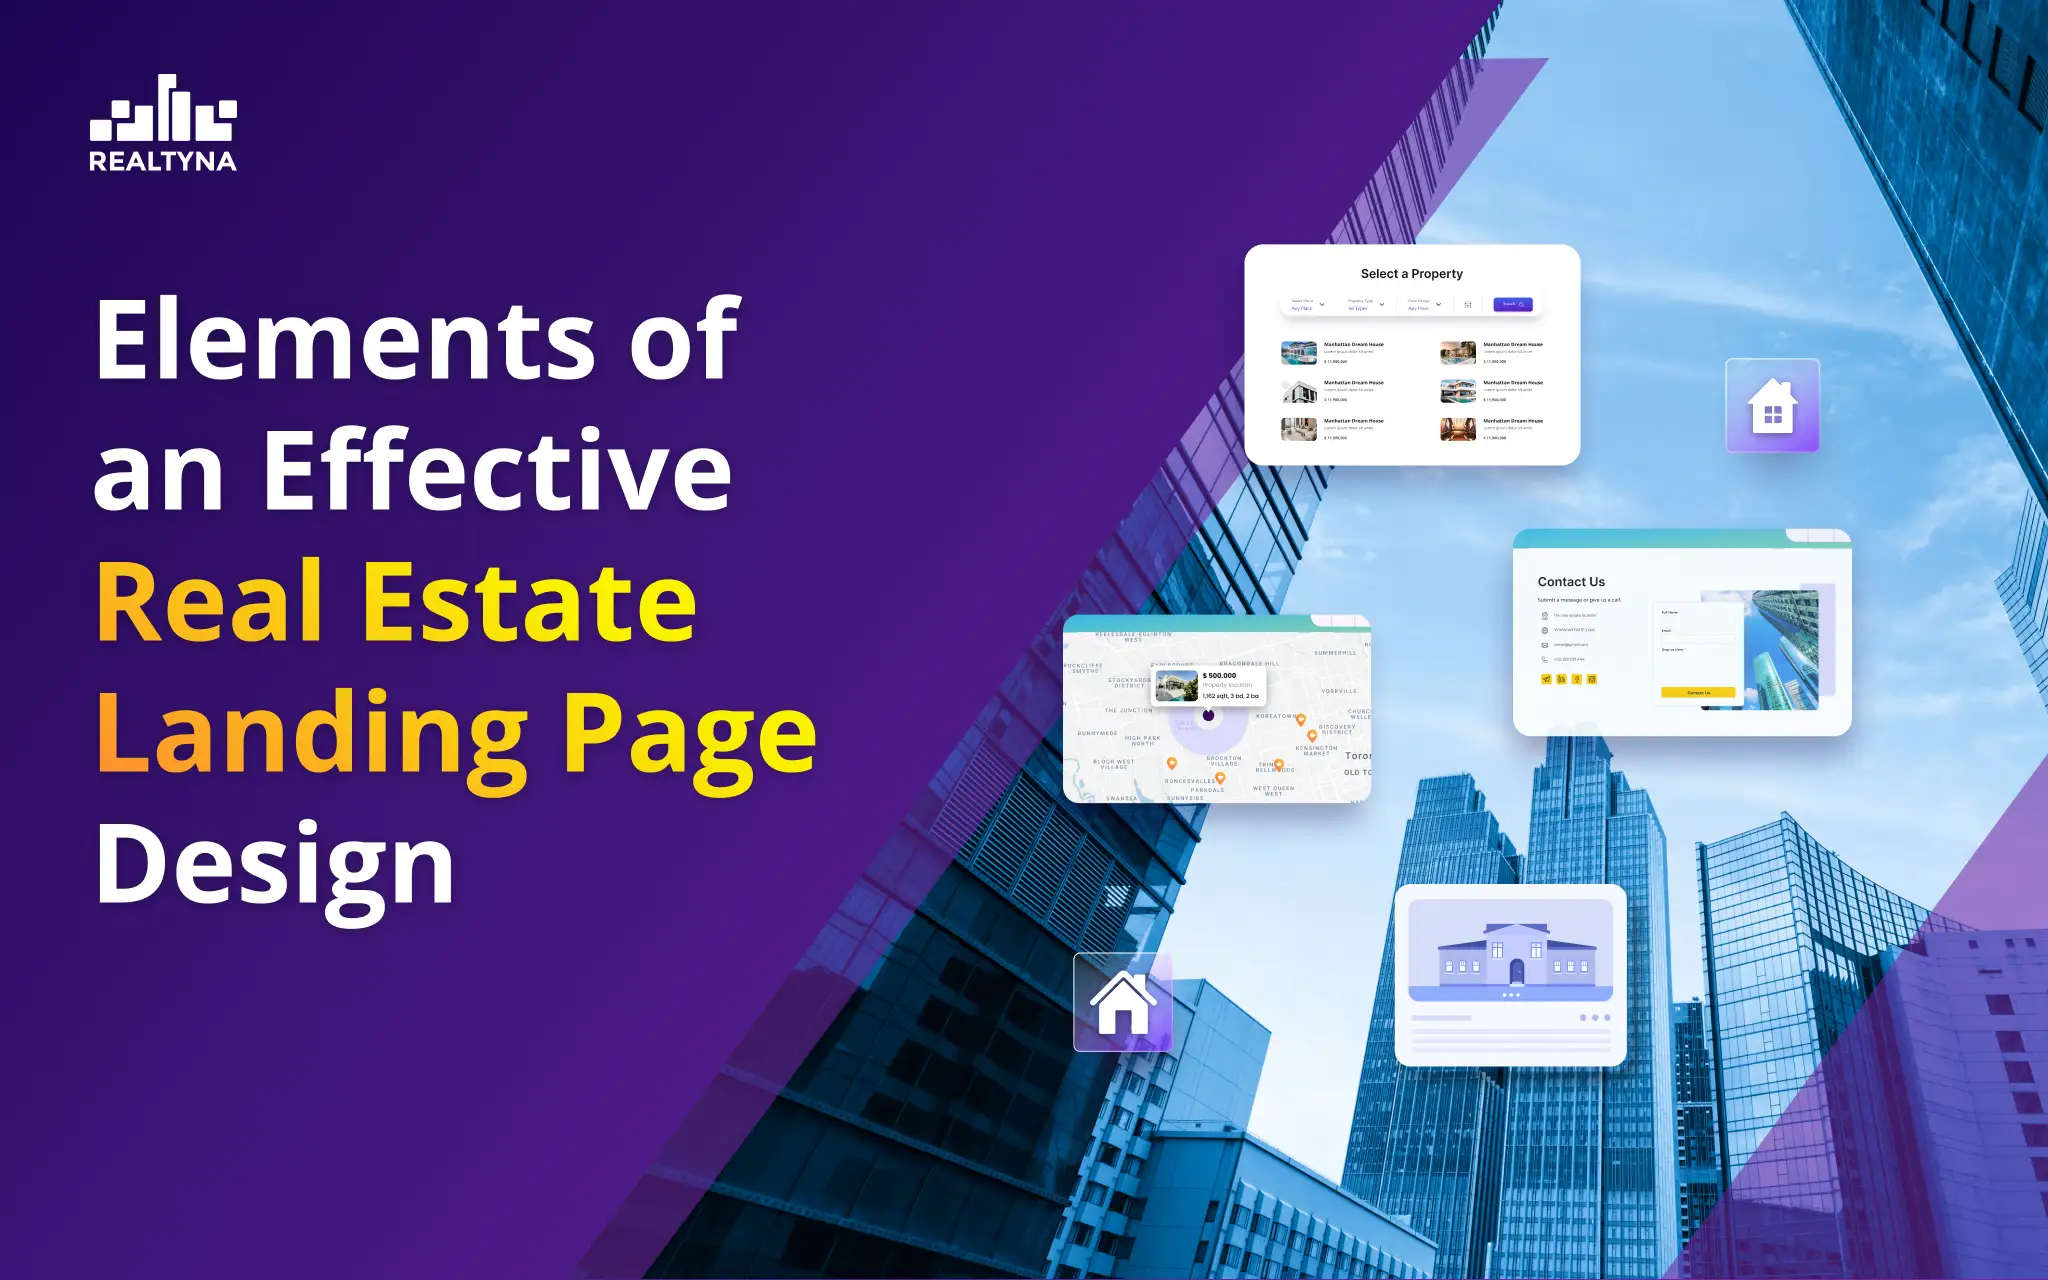 Elements of an Effective Real Estate Landing Page Design